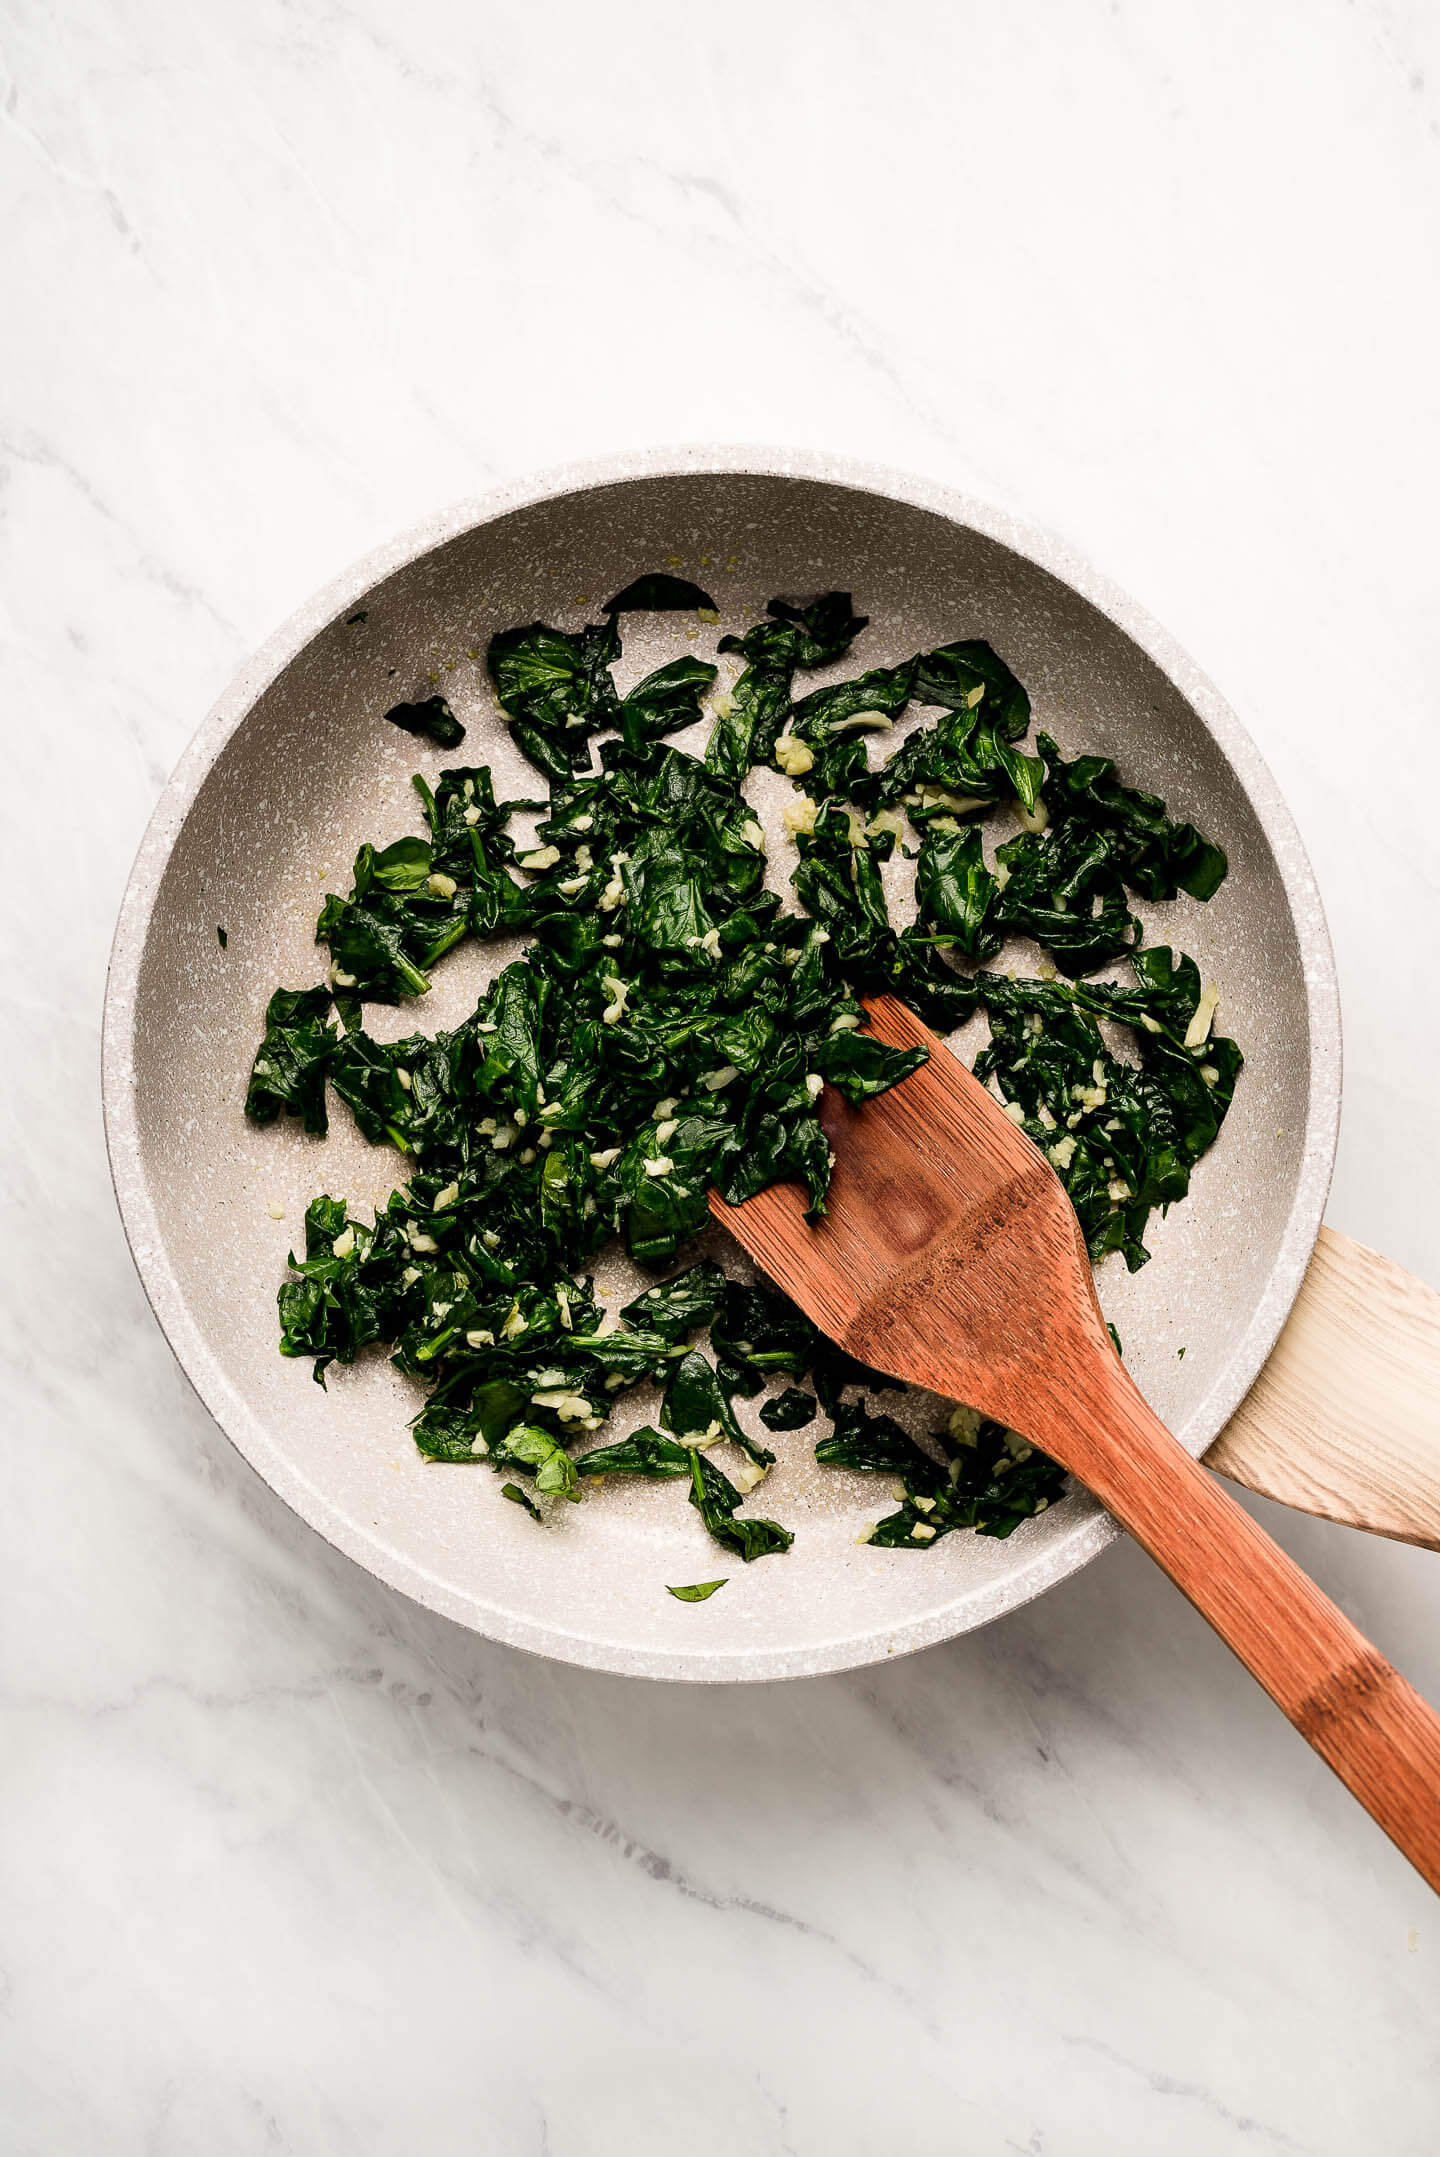 Sautéed spinach and garlic in a skillet.